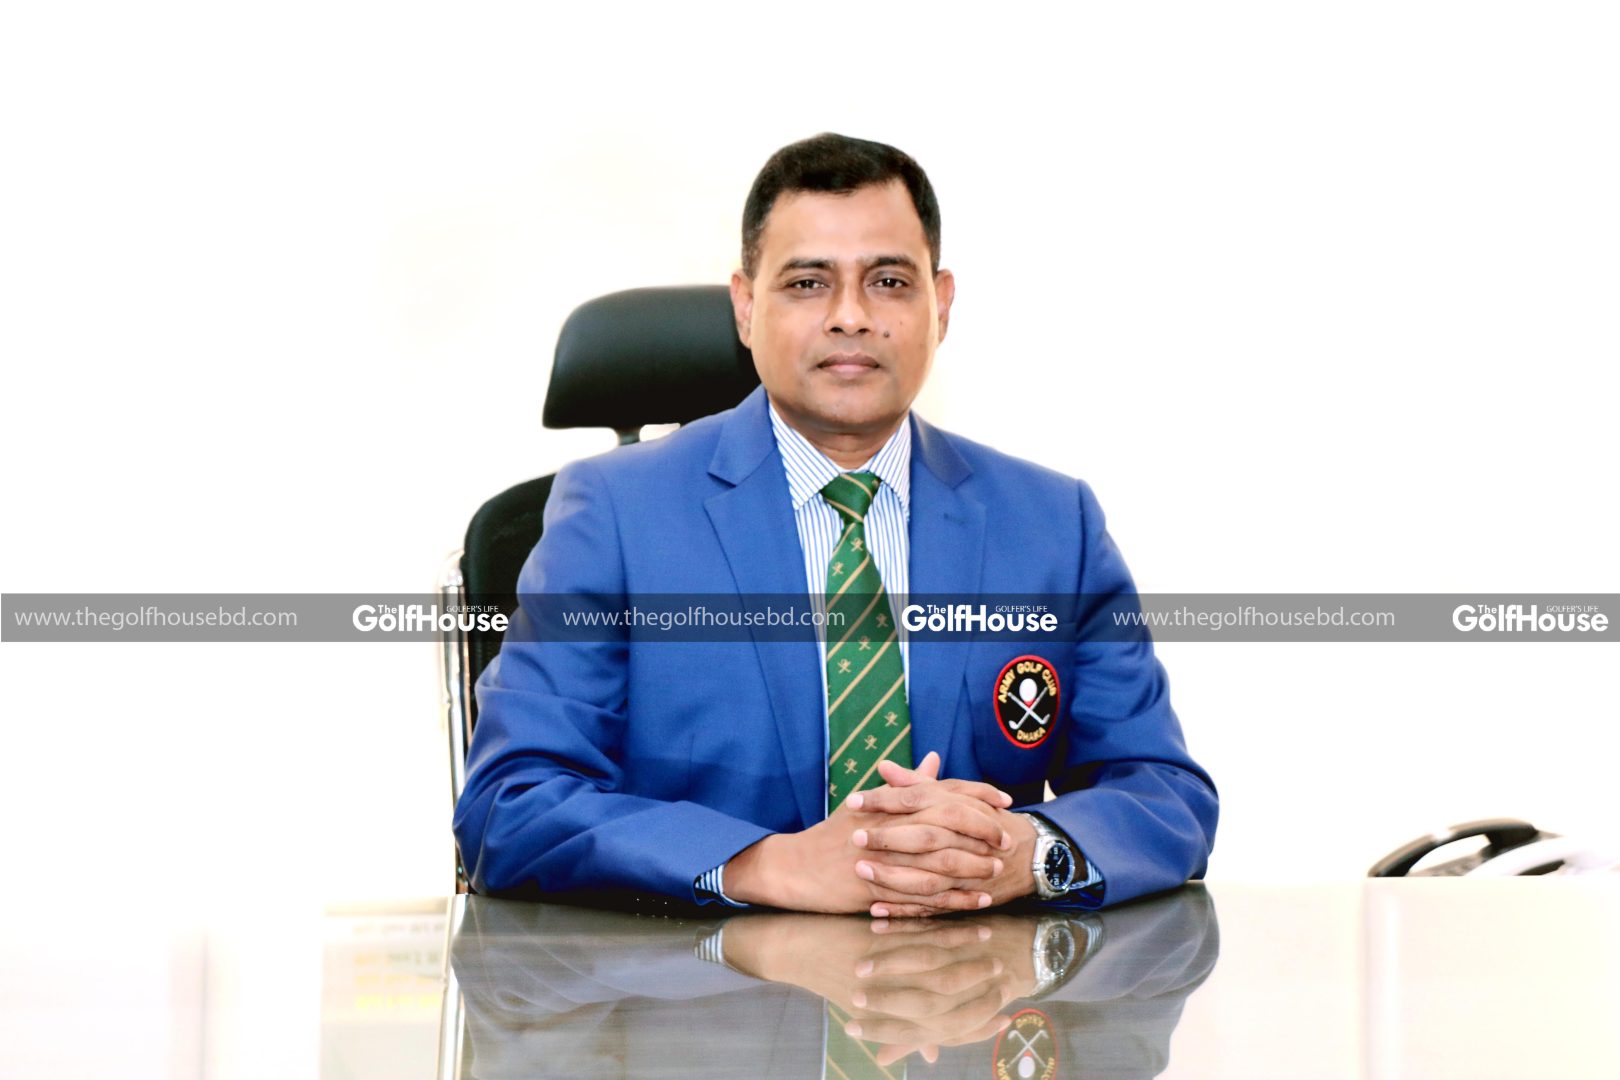 Major General Nazrul Islam, ndu, afwc psc, is the newly-appointed president of the Rangpur Golf & Country Club. When this interview was taken, he was still the president of Junior Golf Division of Bangladesh Golf Federation and Army Golf Club (AGC).